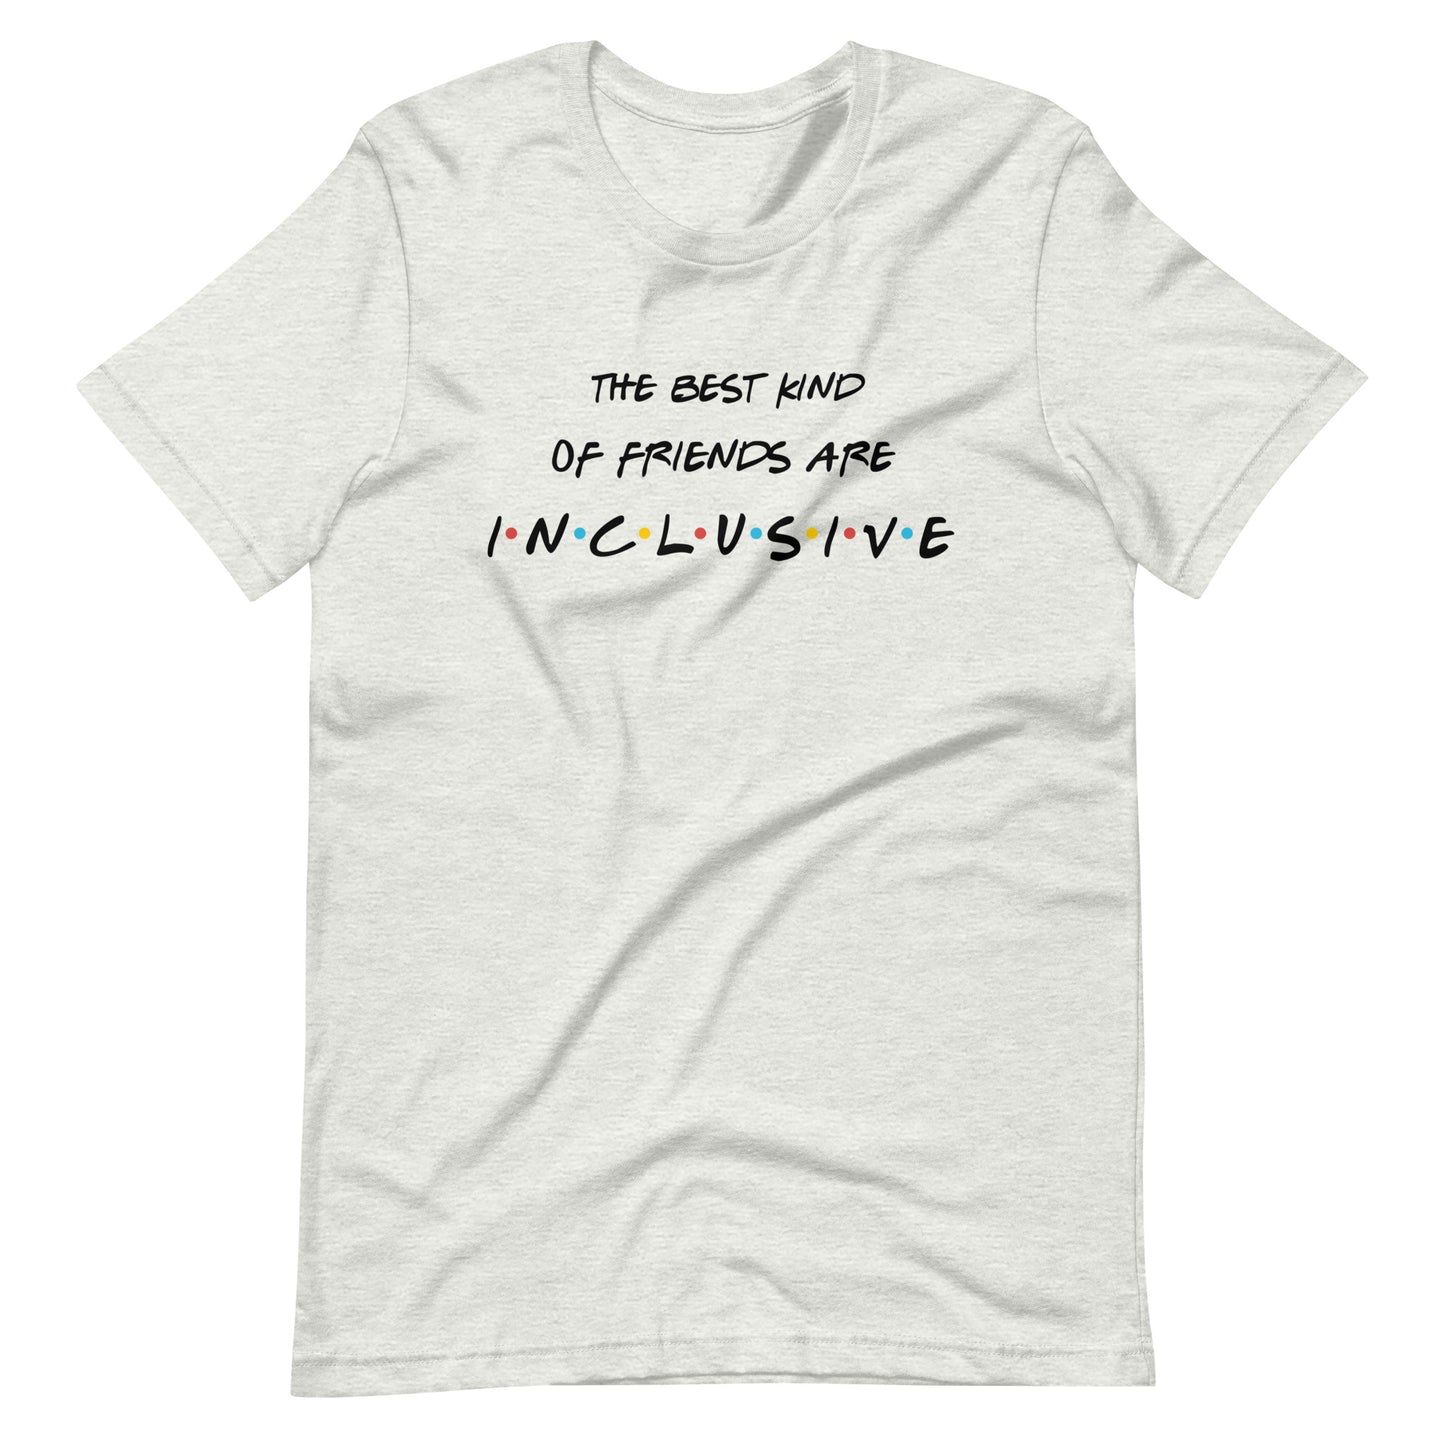 The Best Kind of Friends Are Inclusive | Adult Unisex Tee